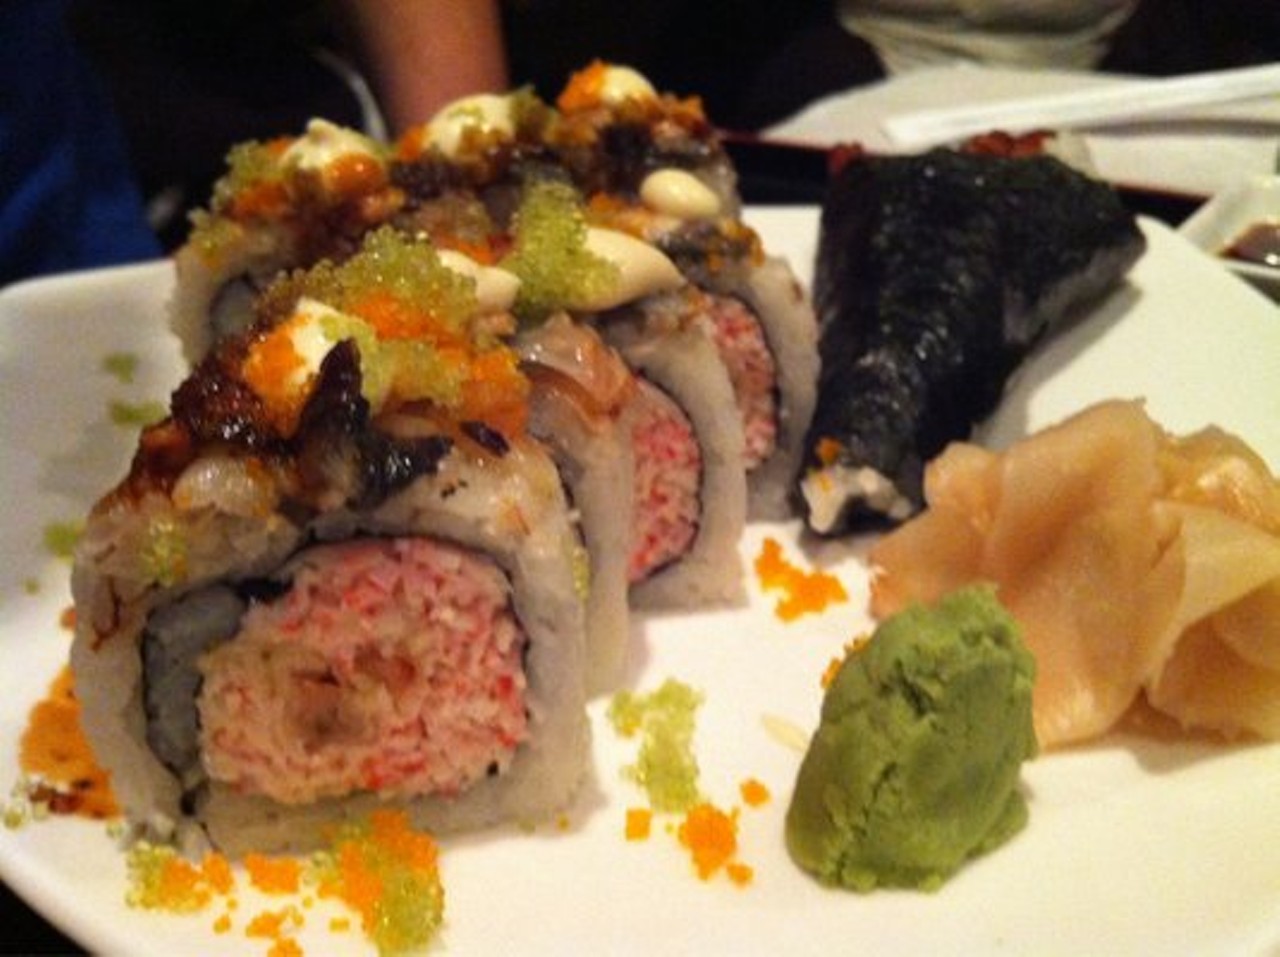 This traditional Japanese sushi restaurant offers a vegan's dream roll. Their Vegetarian Hand Roll Heaven consists of a selection of five different hand rolls: all seasonal vegetables like peppers, Shitake mushrooms, Kaiware daikon, asparagus & green bean.